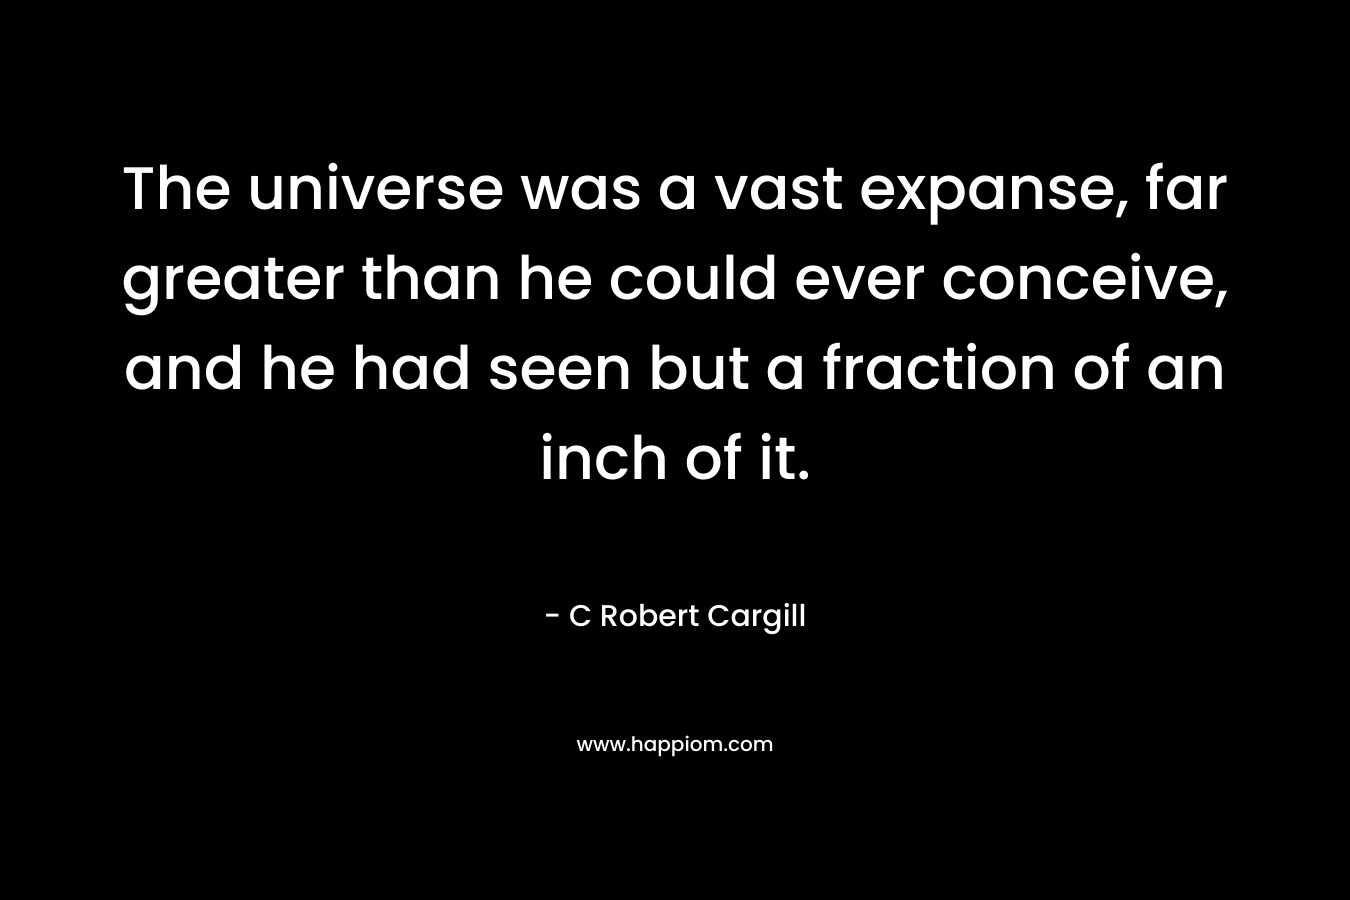 The universe was a vast expanse, far greater than he could ever conceive, and he had seen but a fraction of an inch of it. – C Robert Cargill